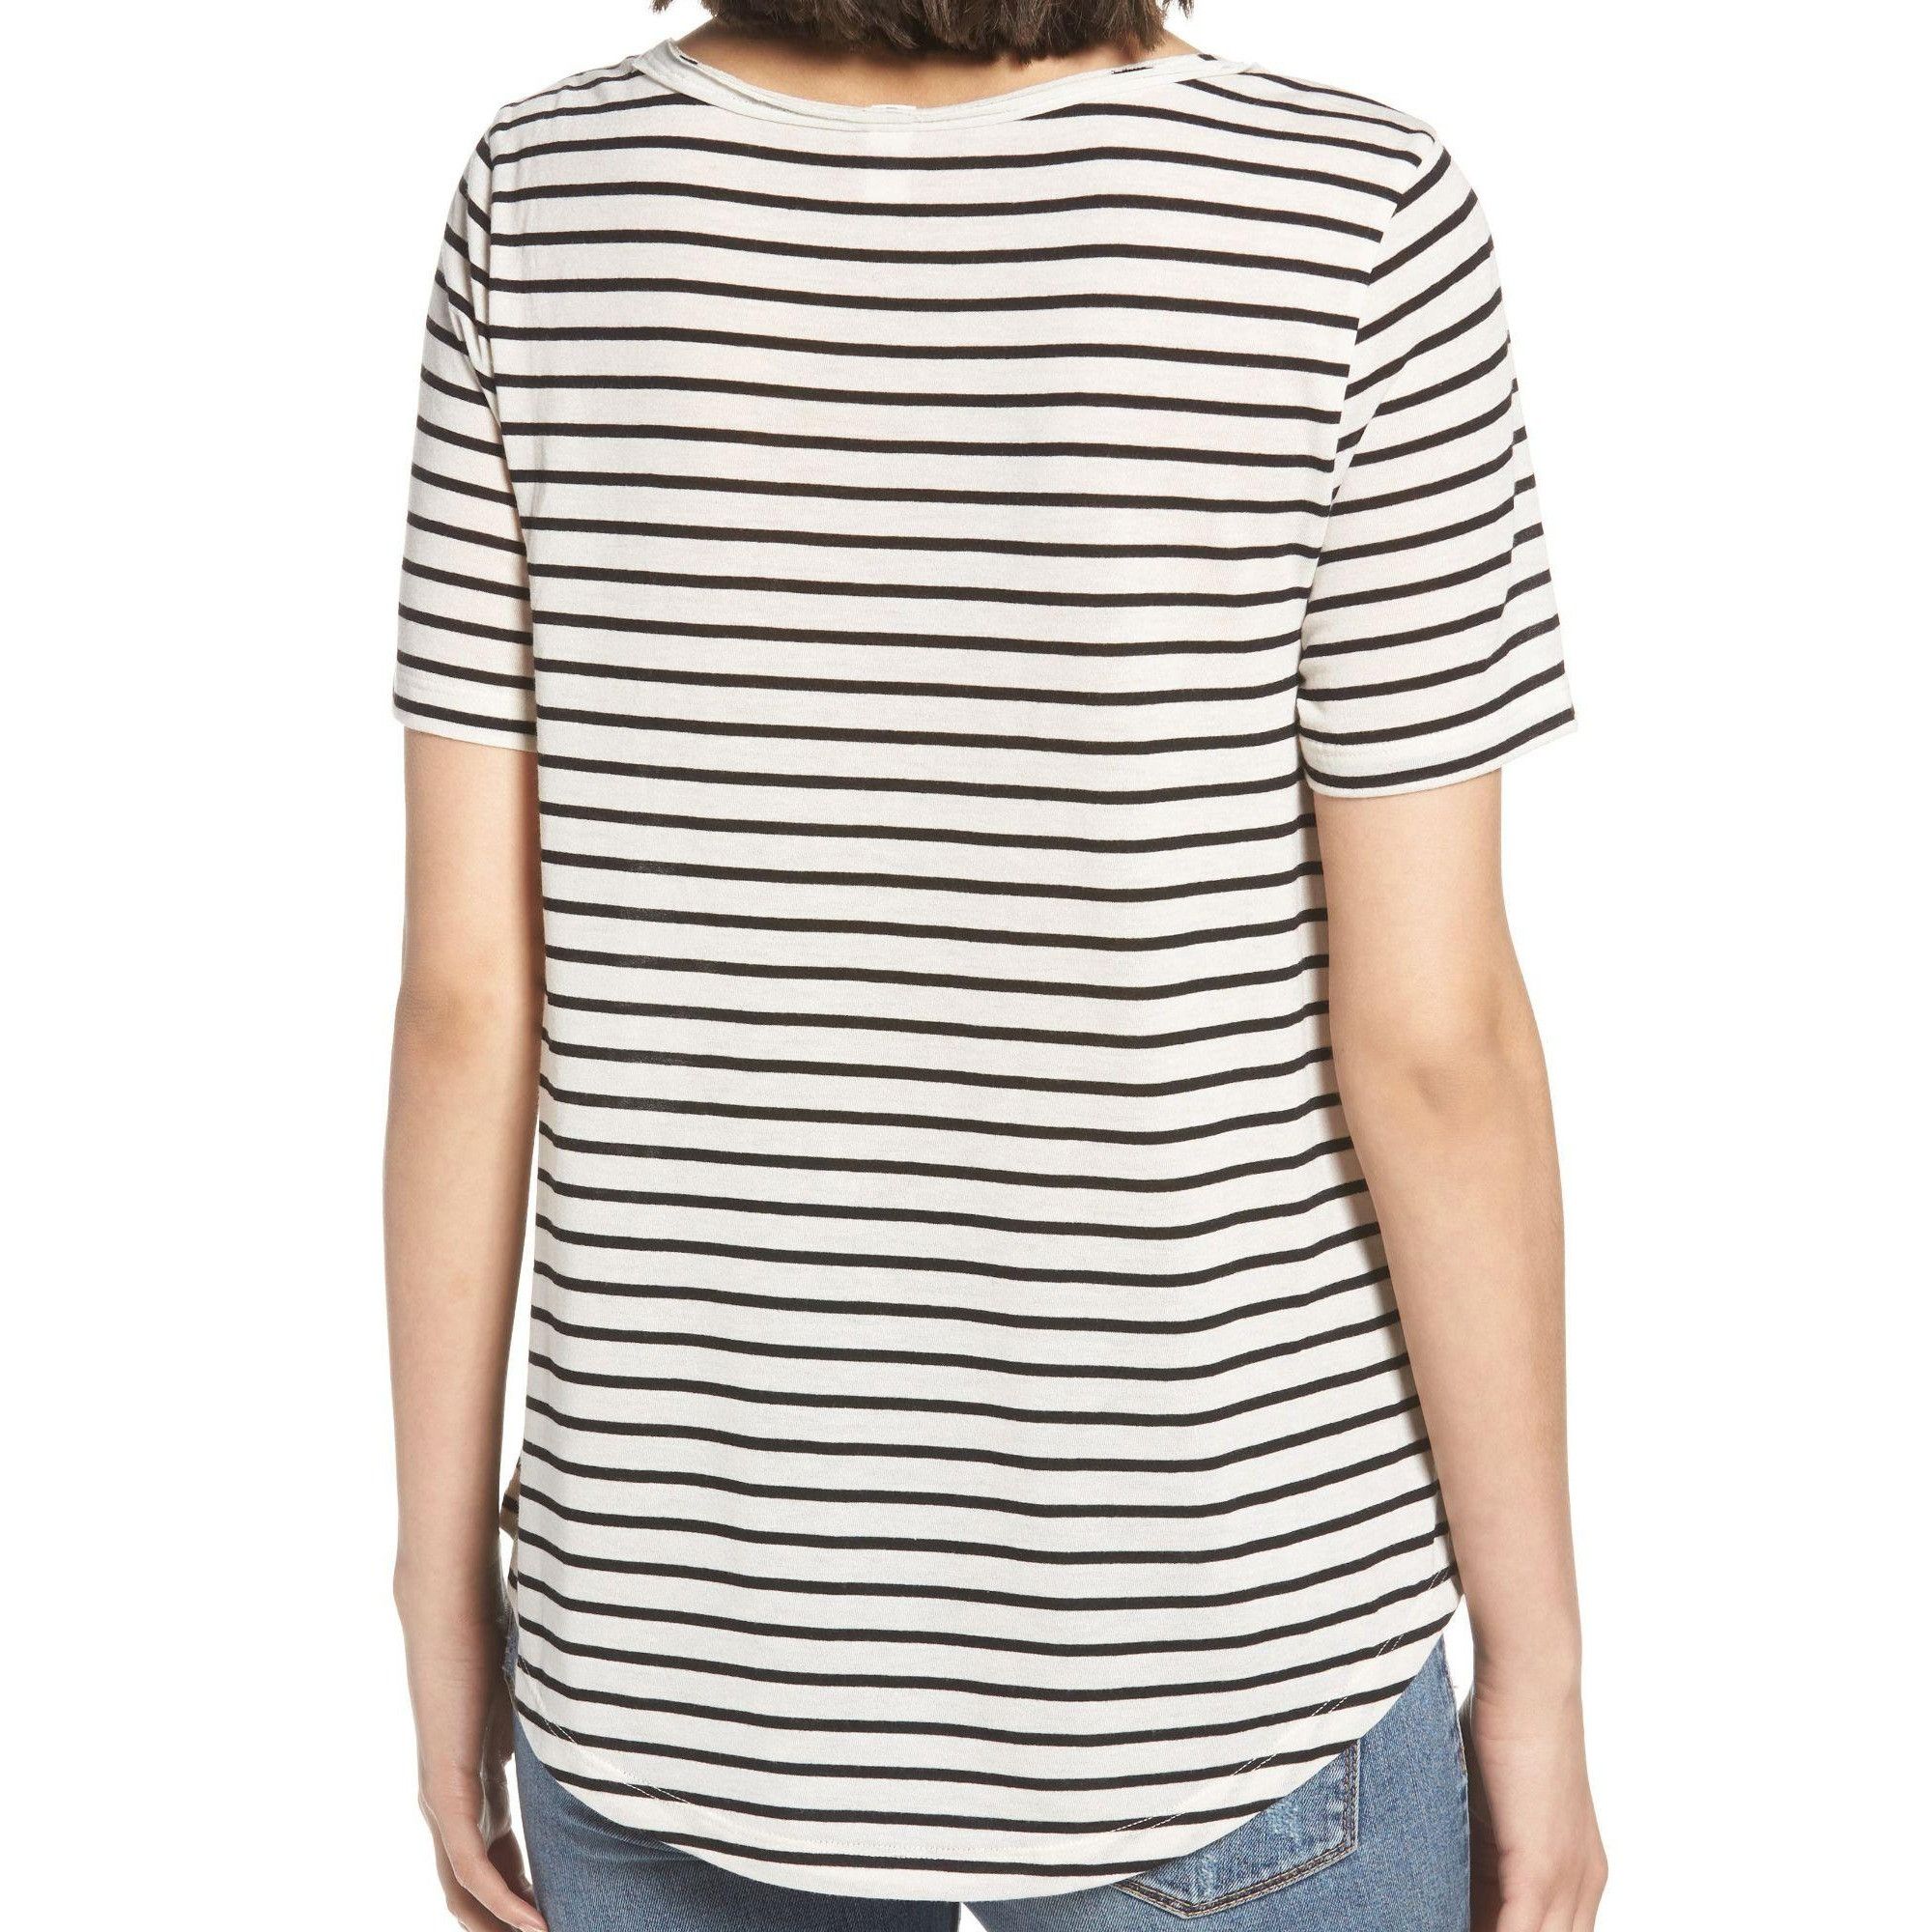 BP bp white ivory black striped raw edge v-neck tee extra small Size XS / US 0-2 / IT 36-38 - 2 Preview